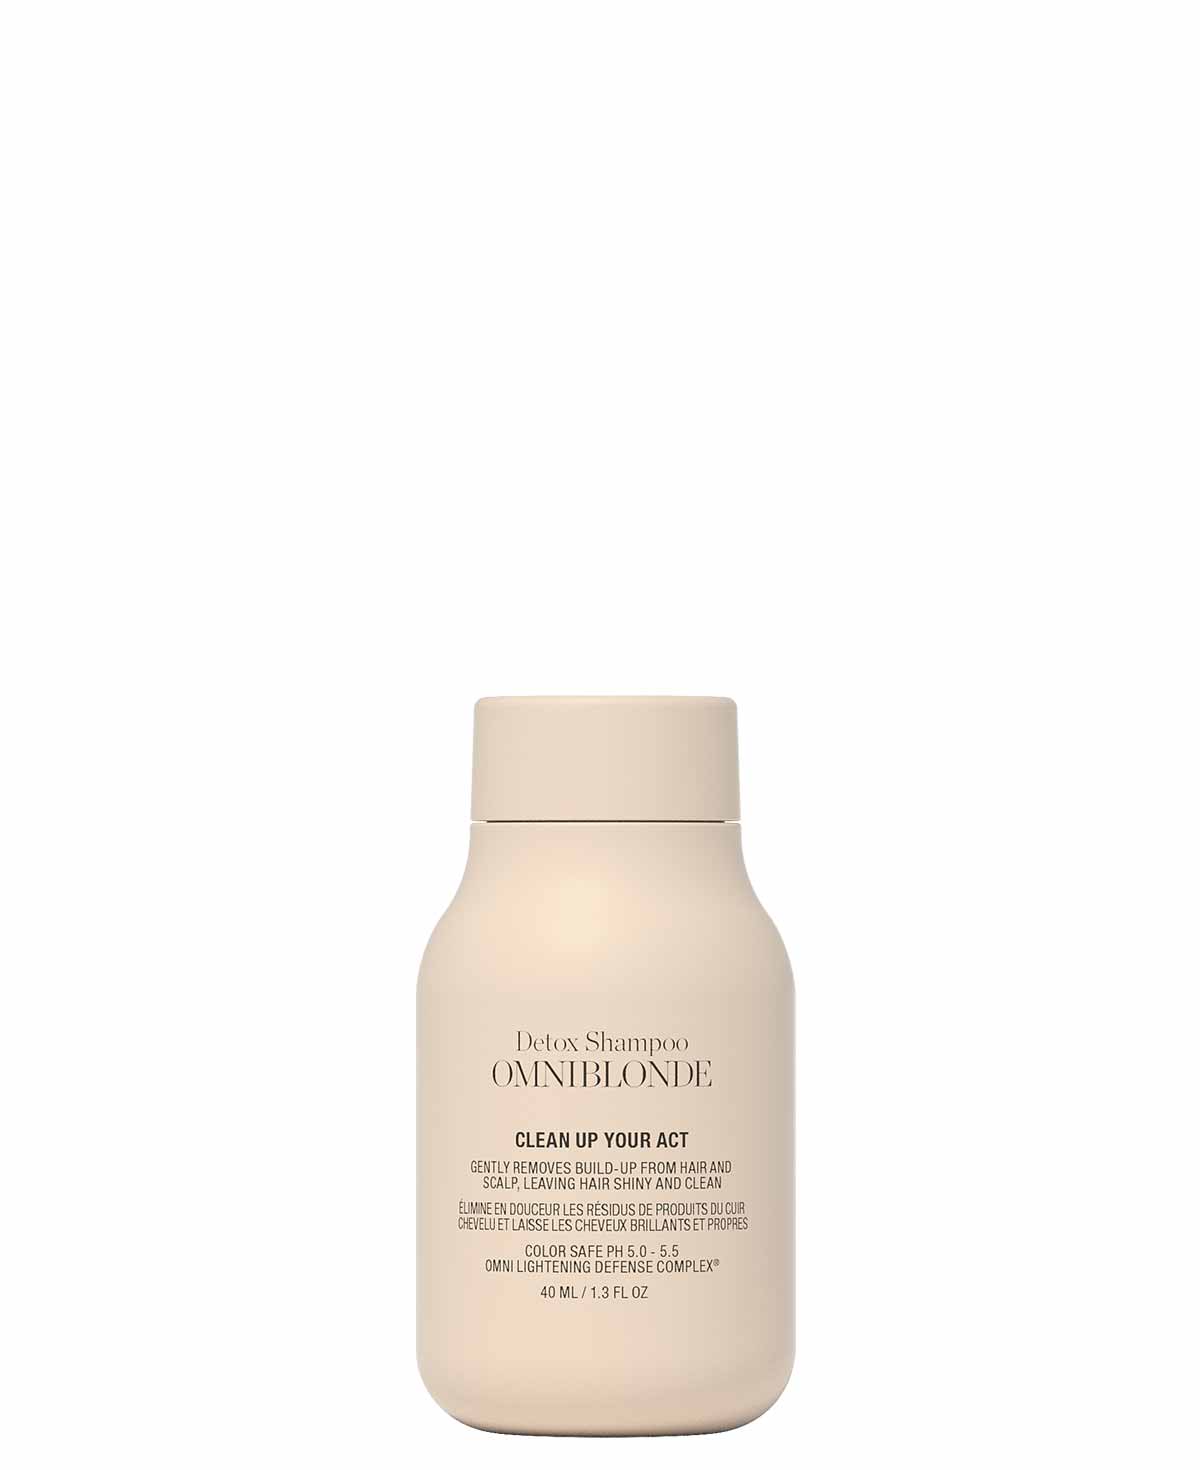 Omniblonde Clean Up Your Act Detox Shampoo 40ml